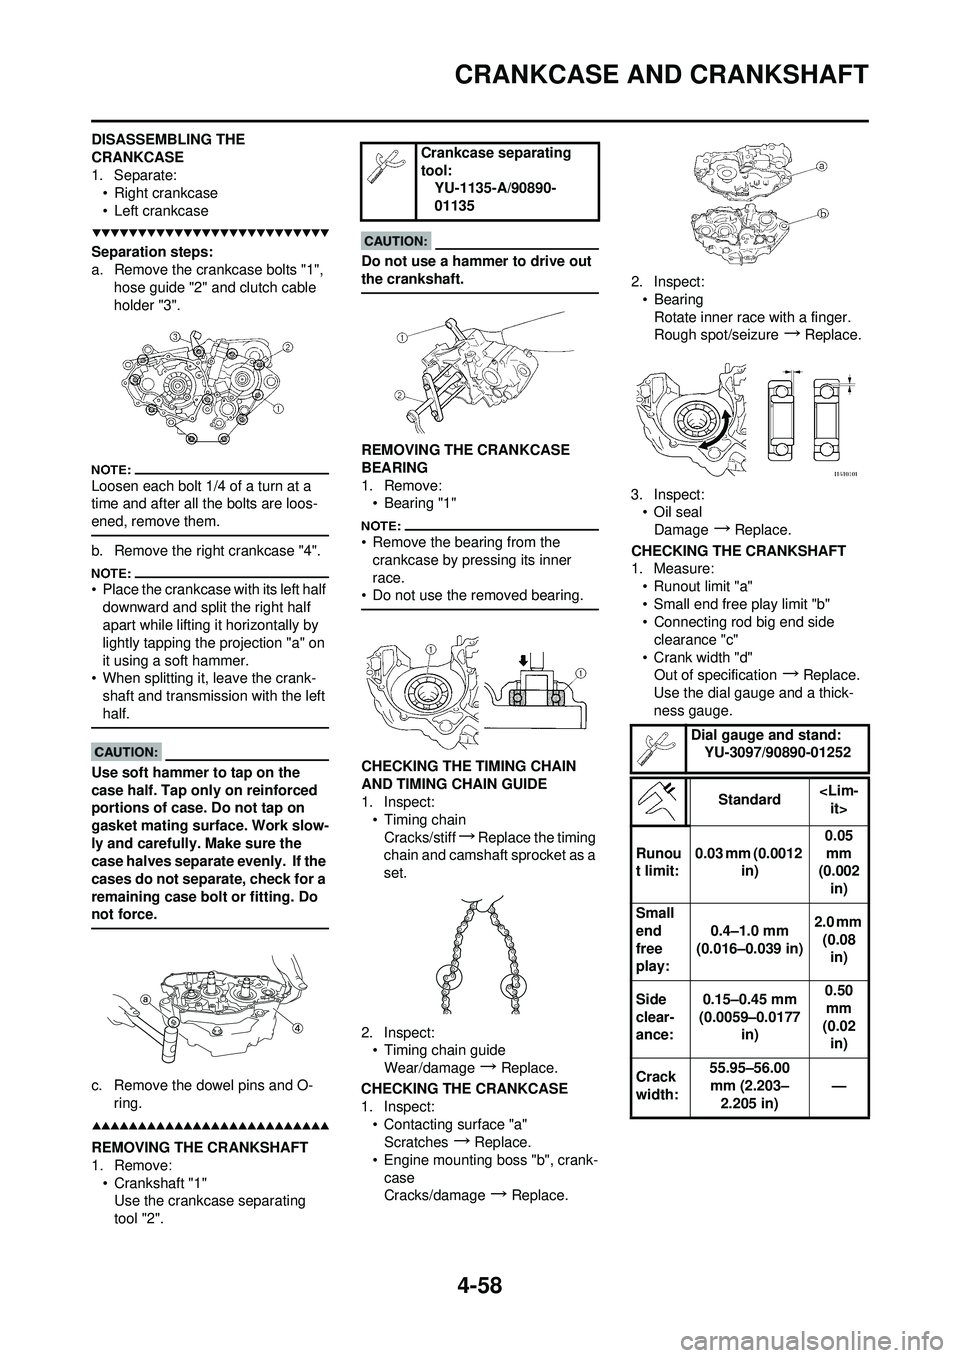 YAMAHA YZ250F 2008  Betriebsanleitungen (in German) 4-58
CRANKCASE AND CRANKSHAFT
DISASSEMBLING THE 
CRANKCASE
1. Separate:• Right crankcase
• Left crankcase
Separation steps:
a. Remove the crankcase bolts "1",  hose guide "2" and clutch cable 
hol